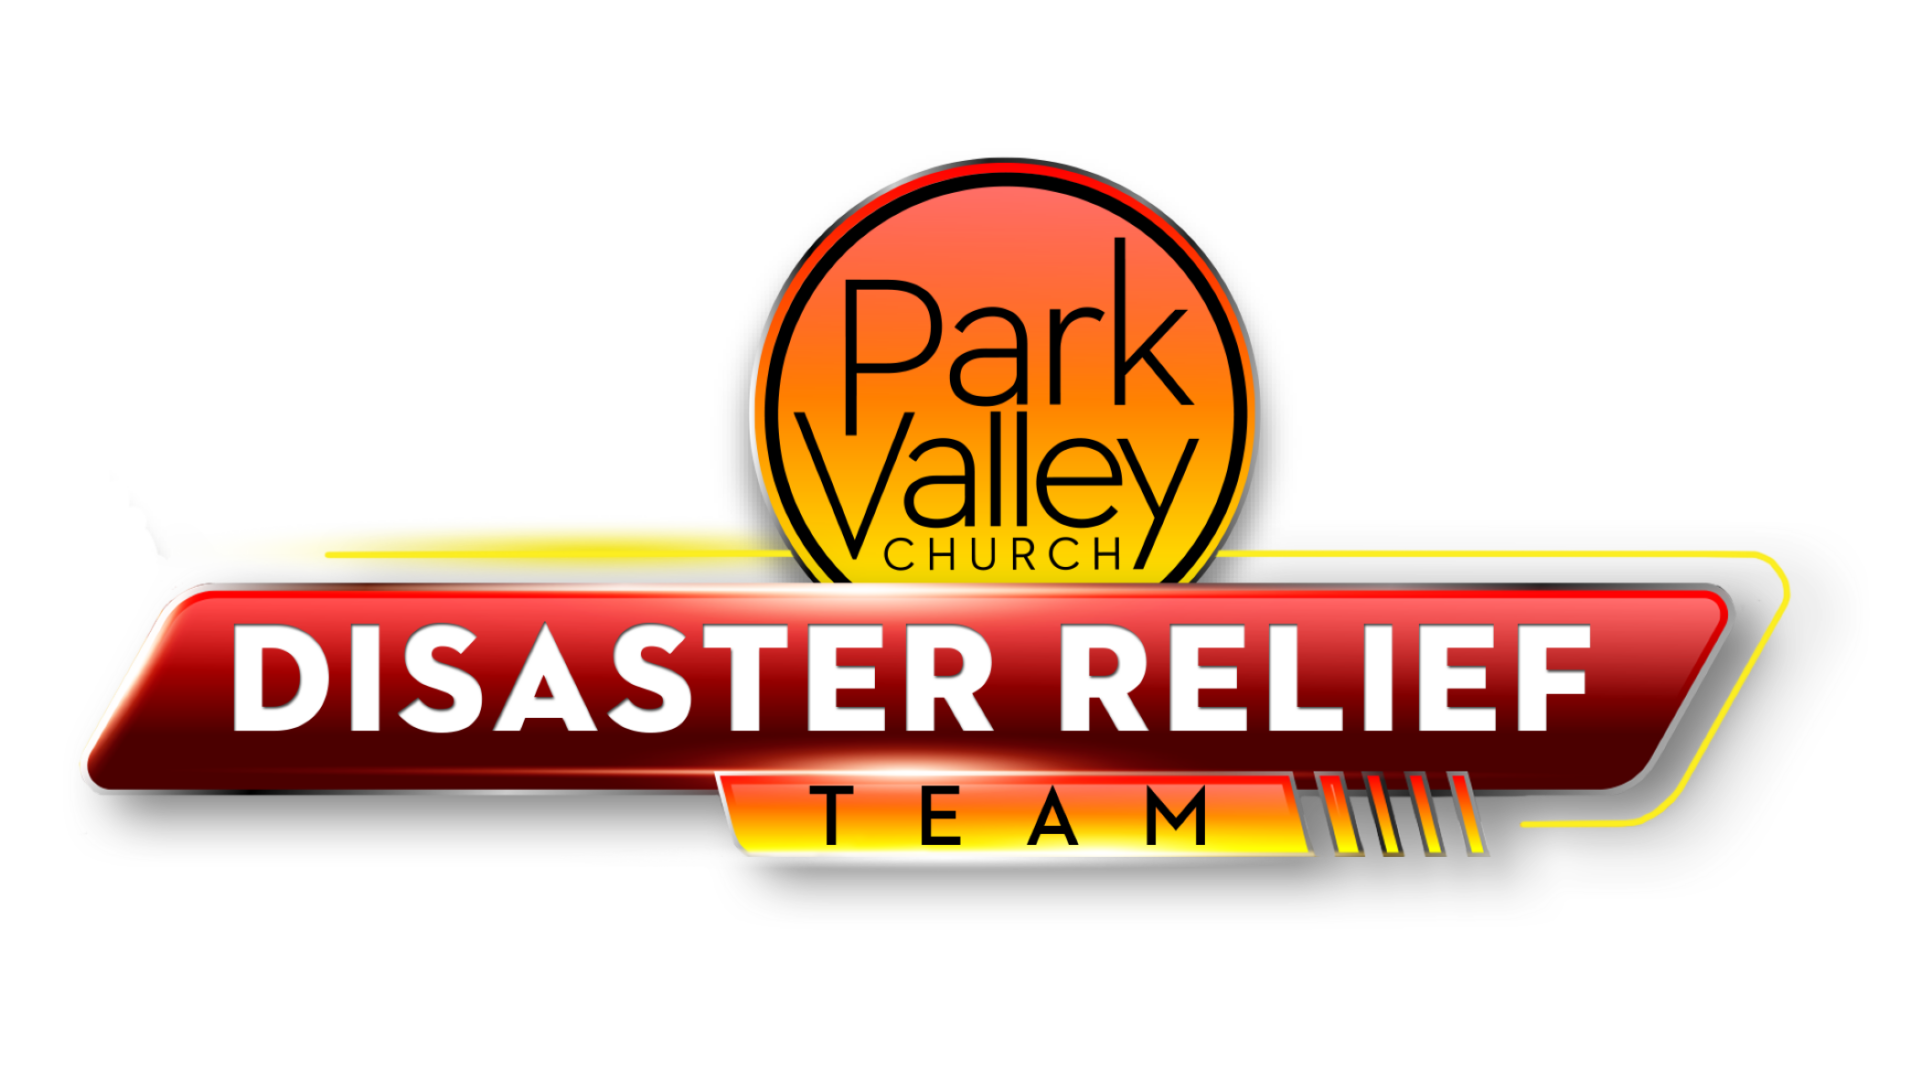 Park Valley Disaster Relief Team